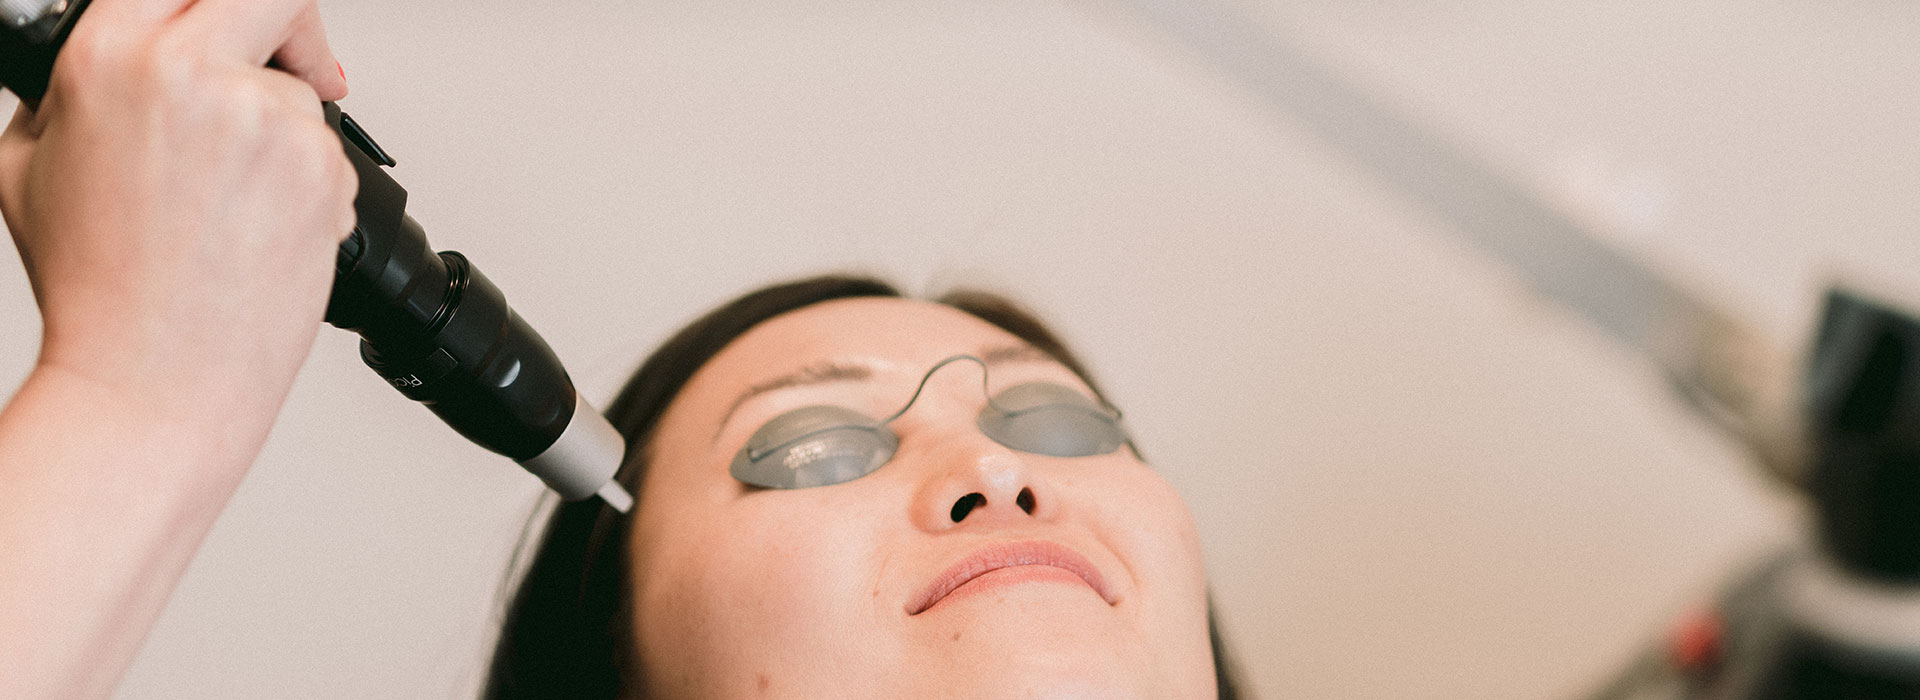 A woman is having a laser skin treatment.